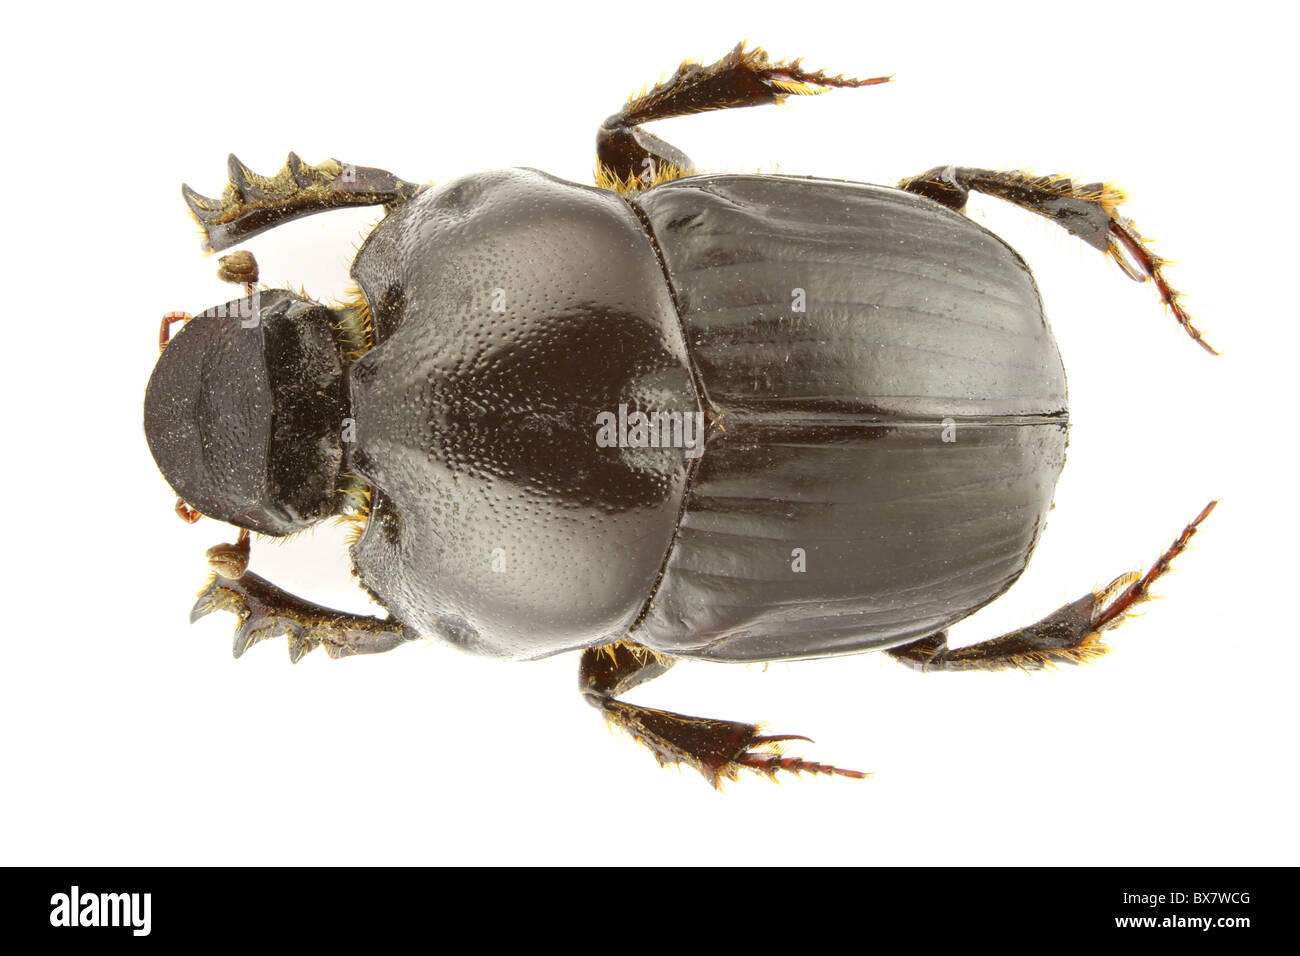 Bubas bubalus (dung beetle) isolated on a white background. Stock Photo